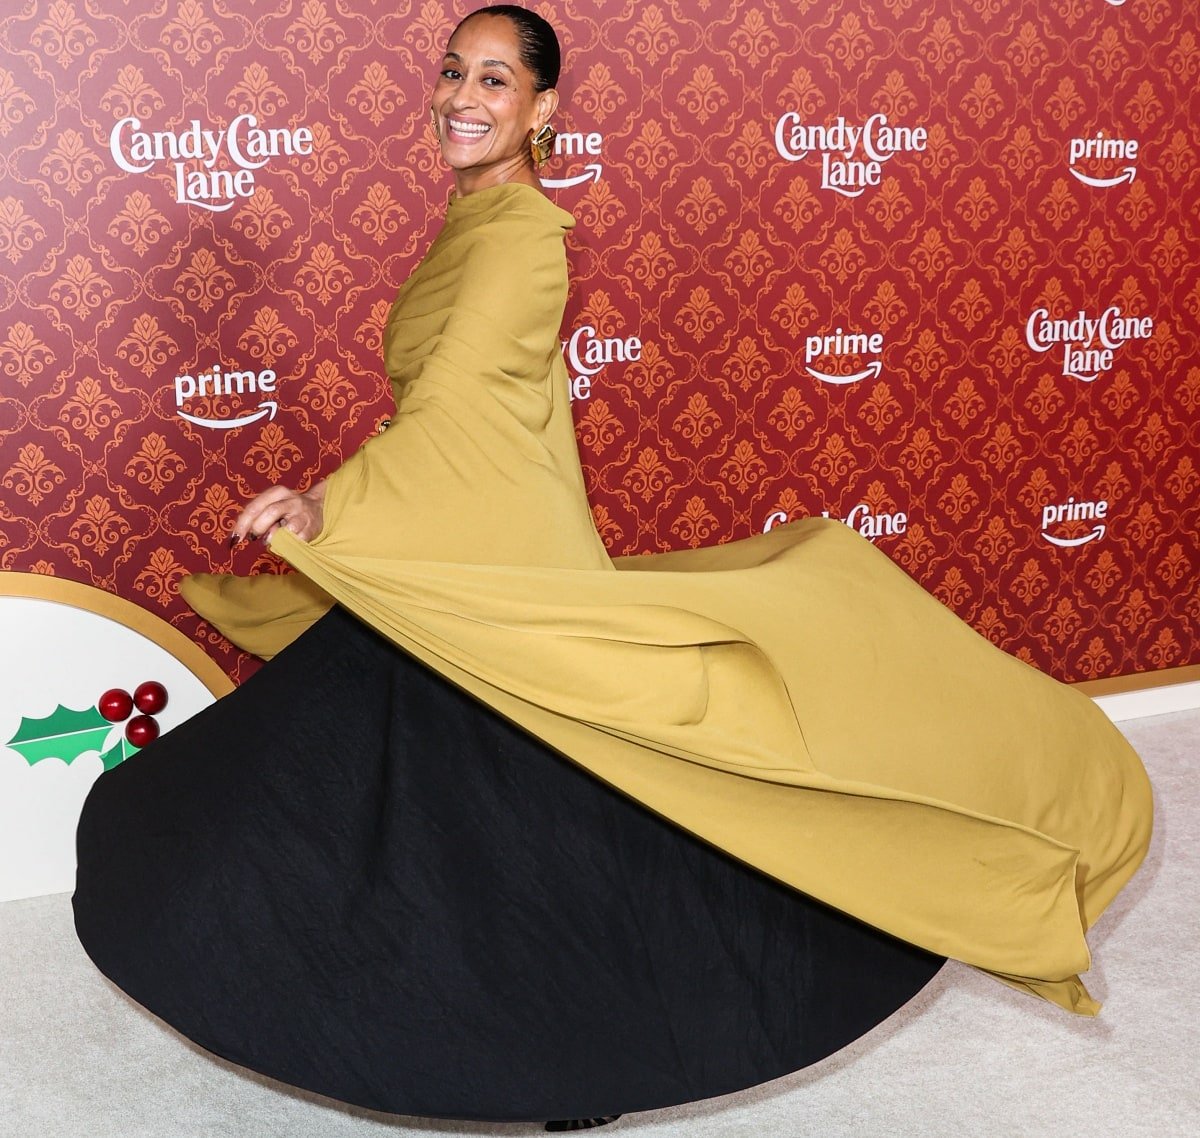 Tracee Ellis Ross making a dramatic return to the red carpet in a mustard-yellow top with cape sleeves that doubled as a long train, creating a mesmerizing effect as she moved while posing for photographs at the premiere of Candy Cane Lane